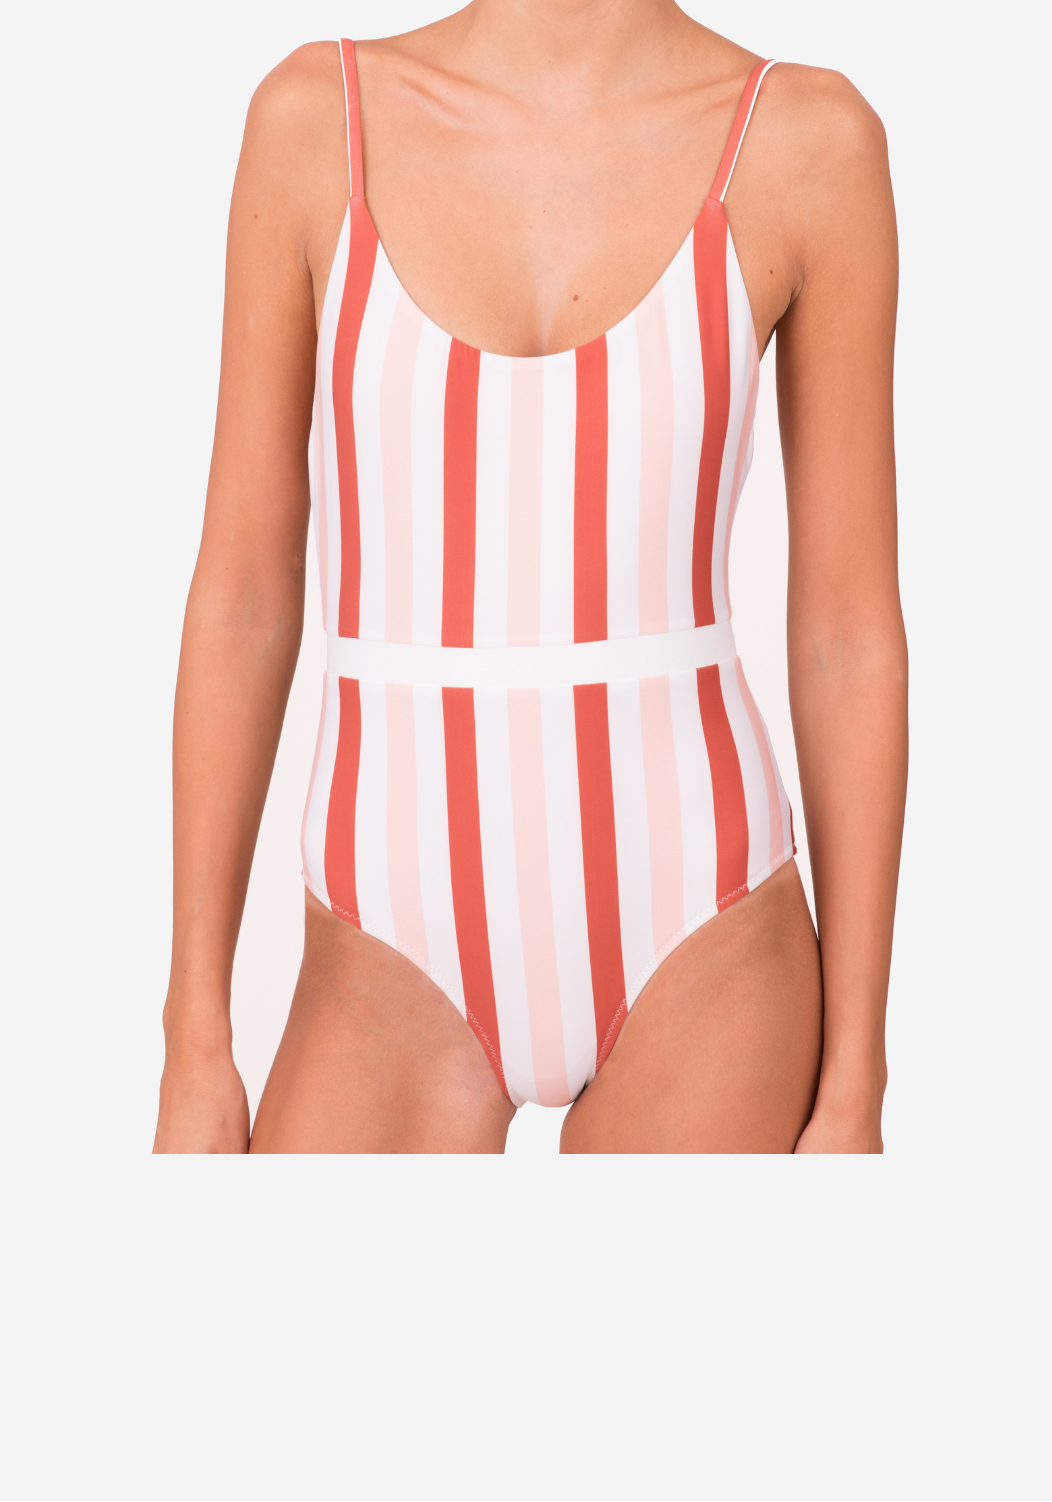 Striped One Piece Swimsuit - recycled nylon.